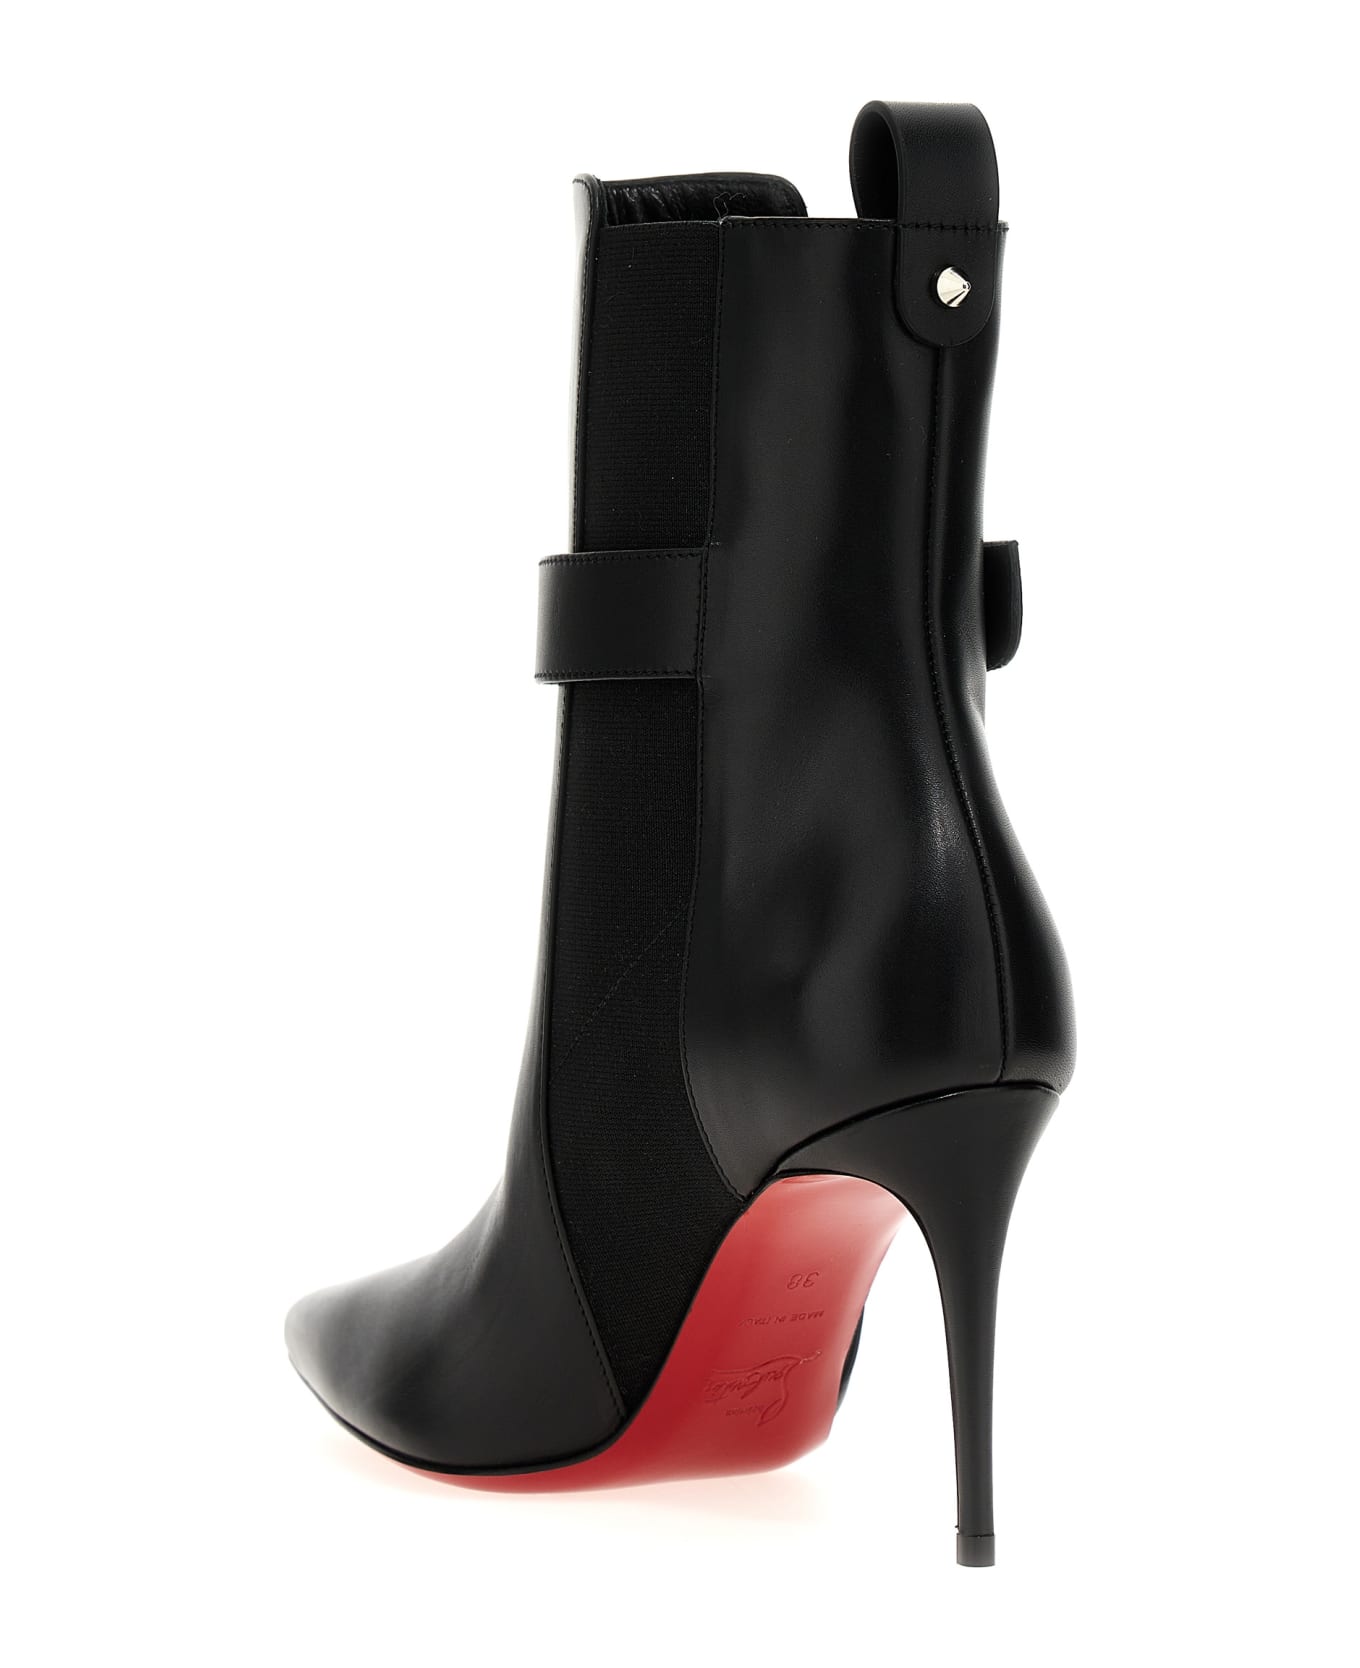 Christian Louboutin 'so Cl' Ankle Boots - Black   ブーツ